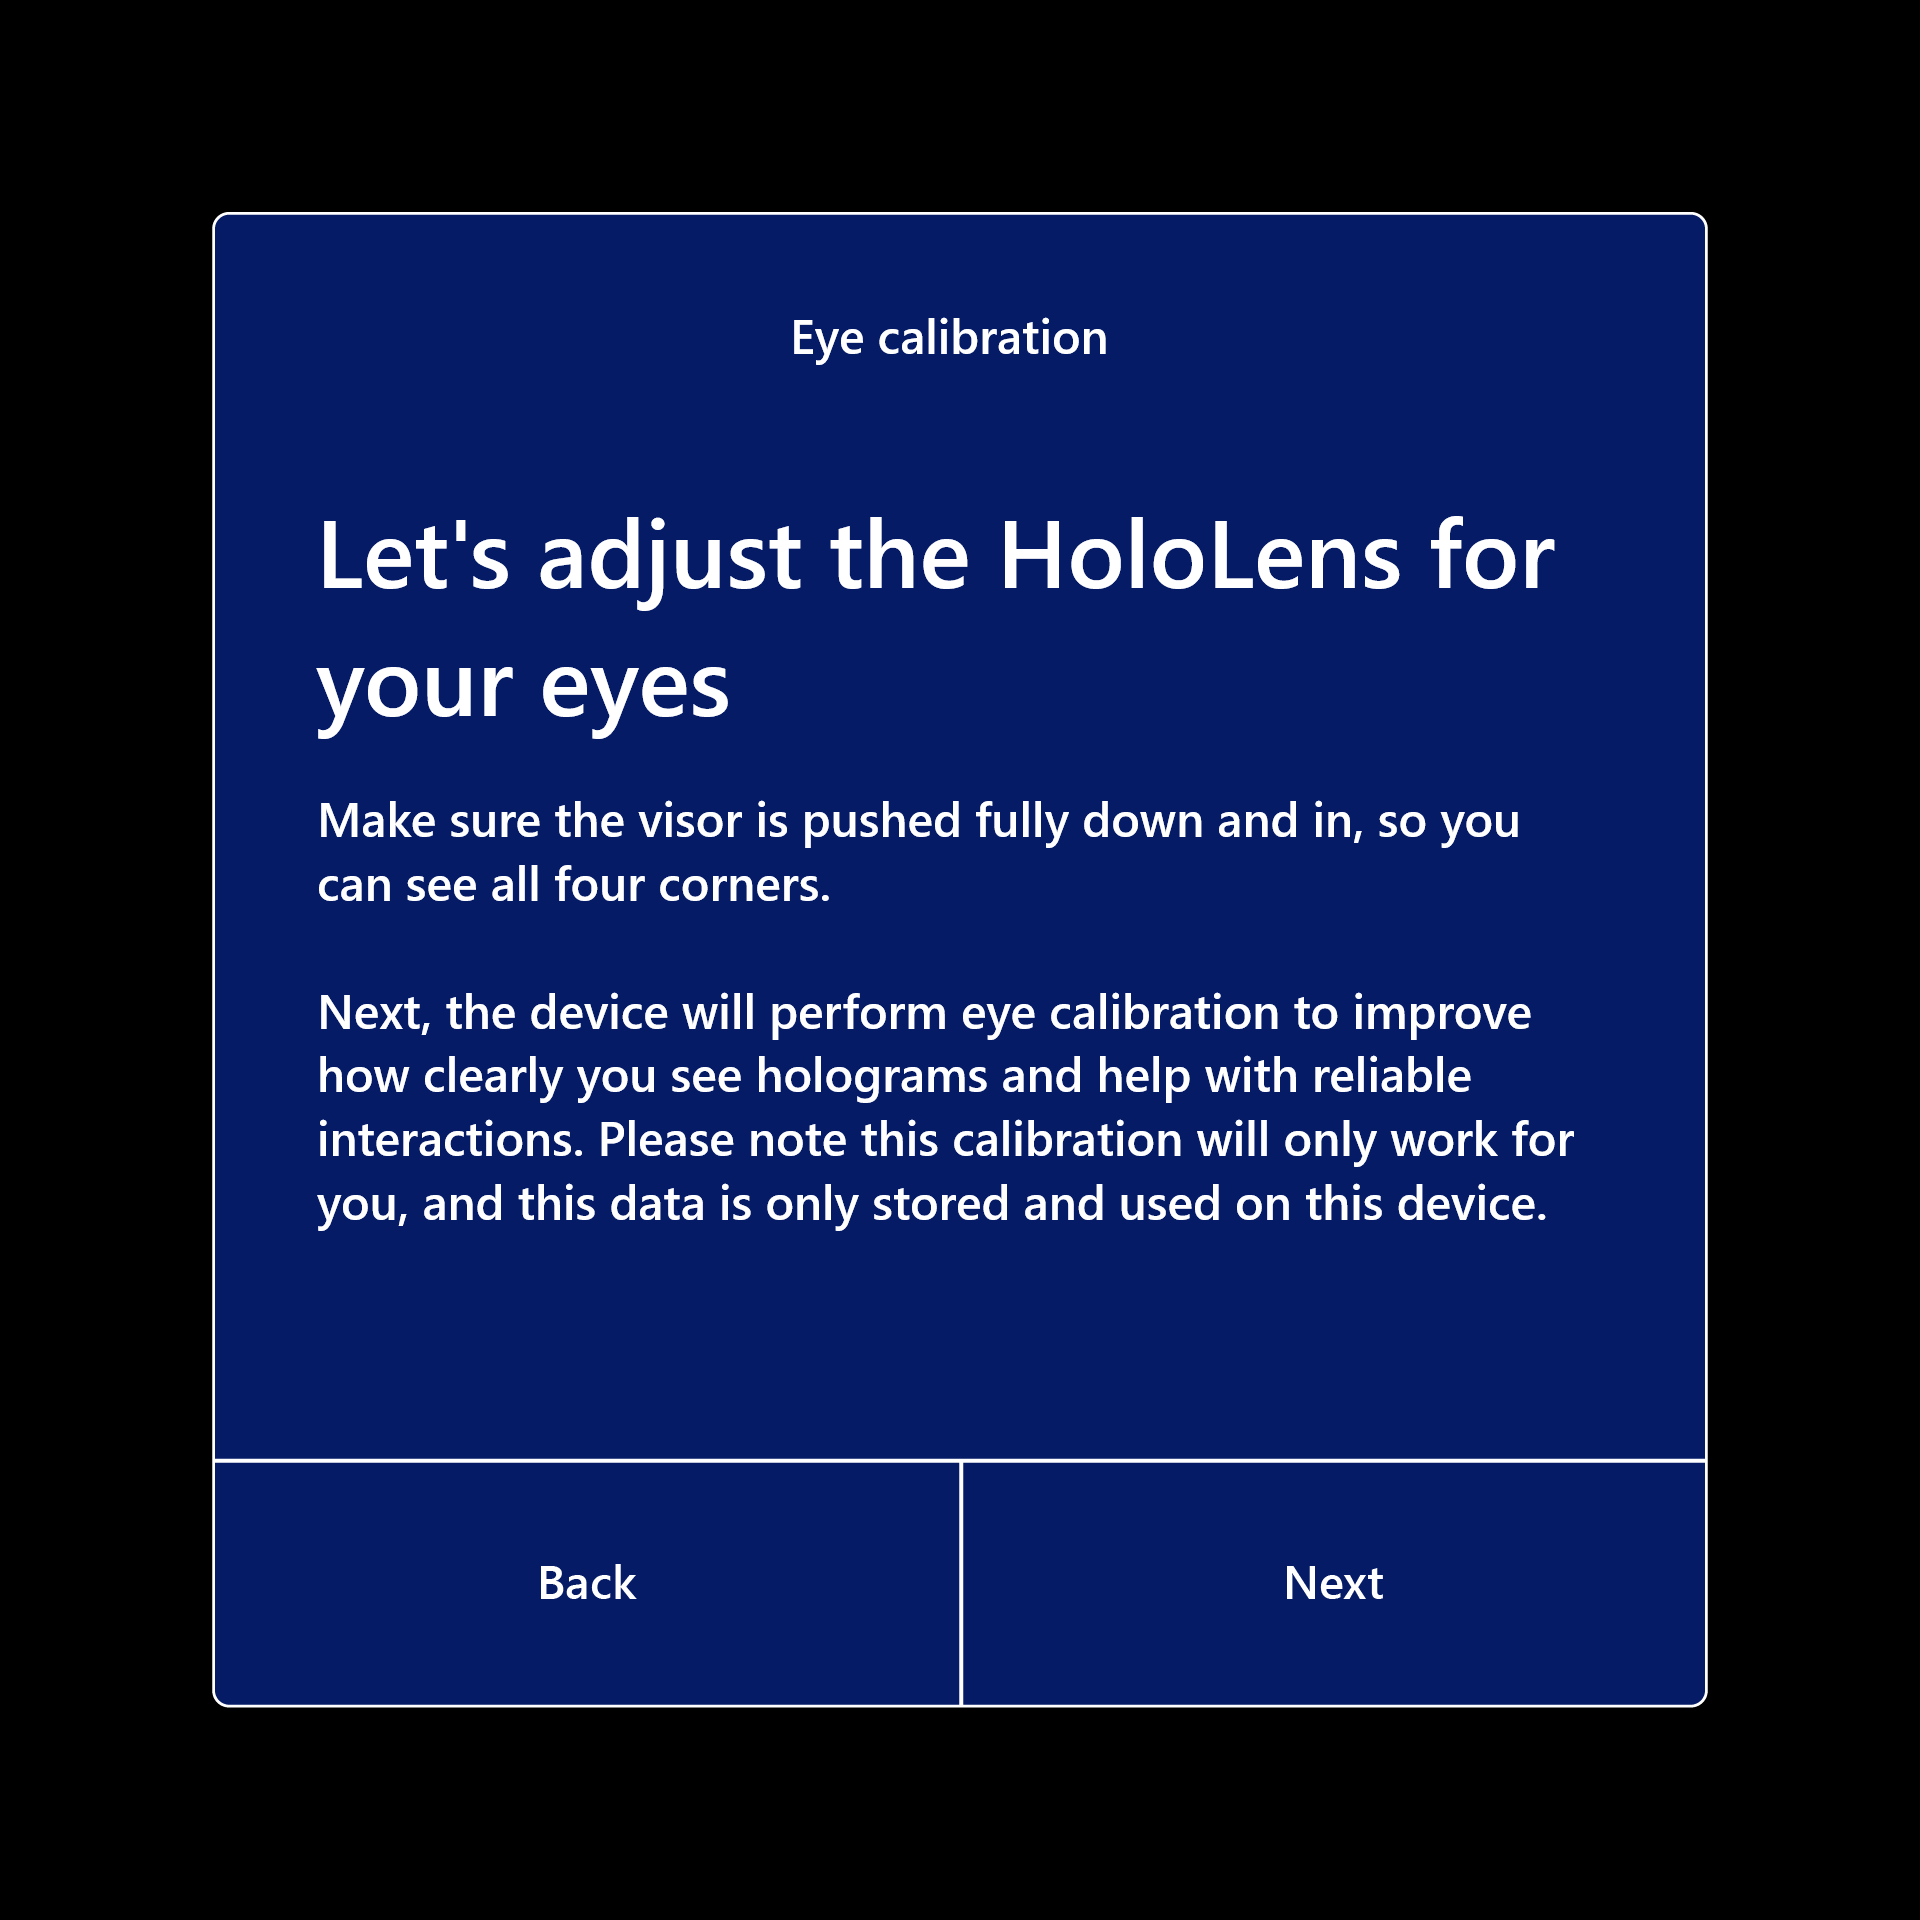 Please adjust the HoloLens for your eyes so that calibration may continue.